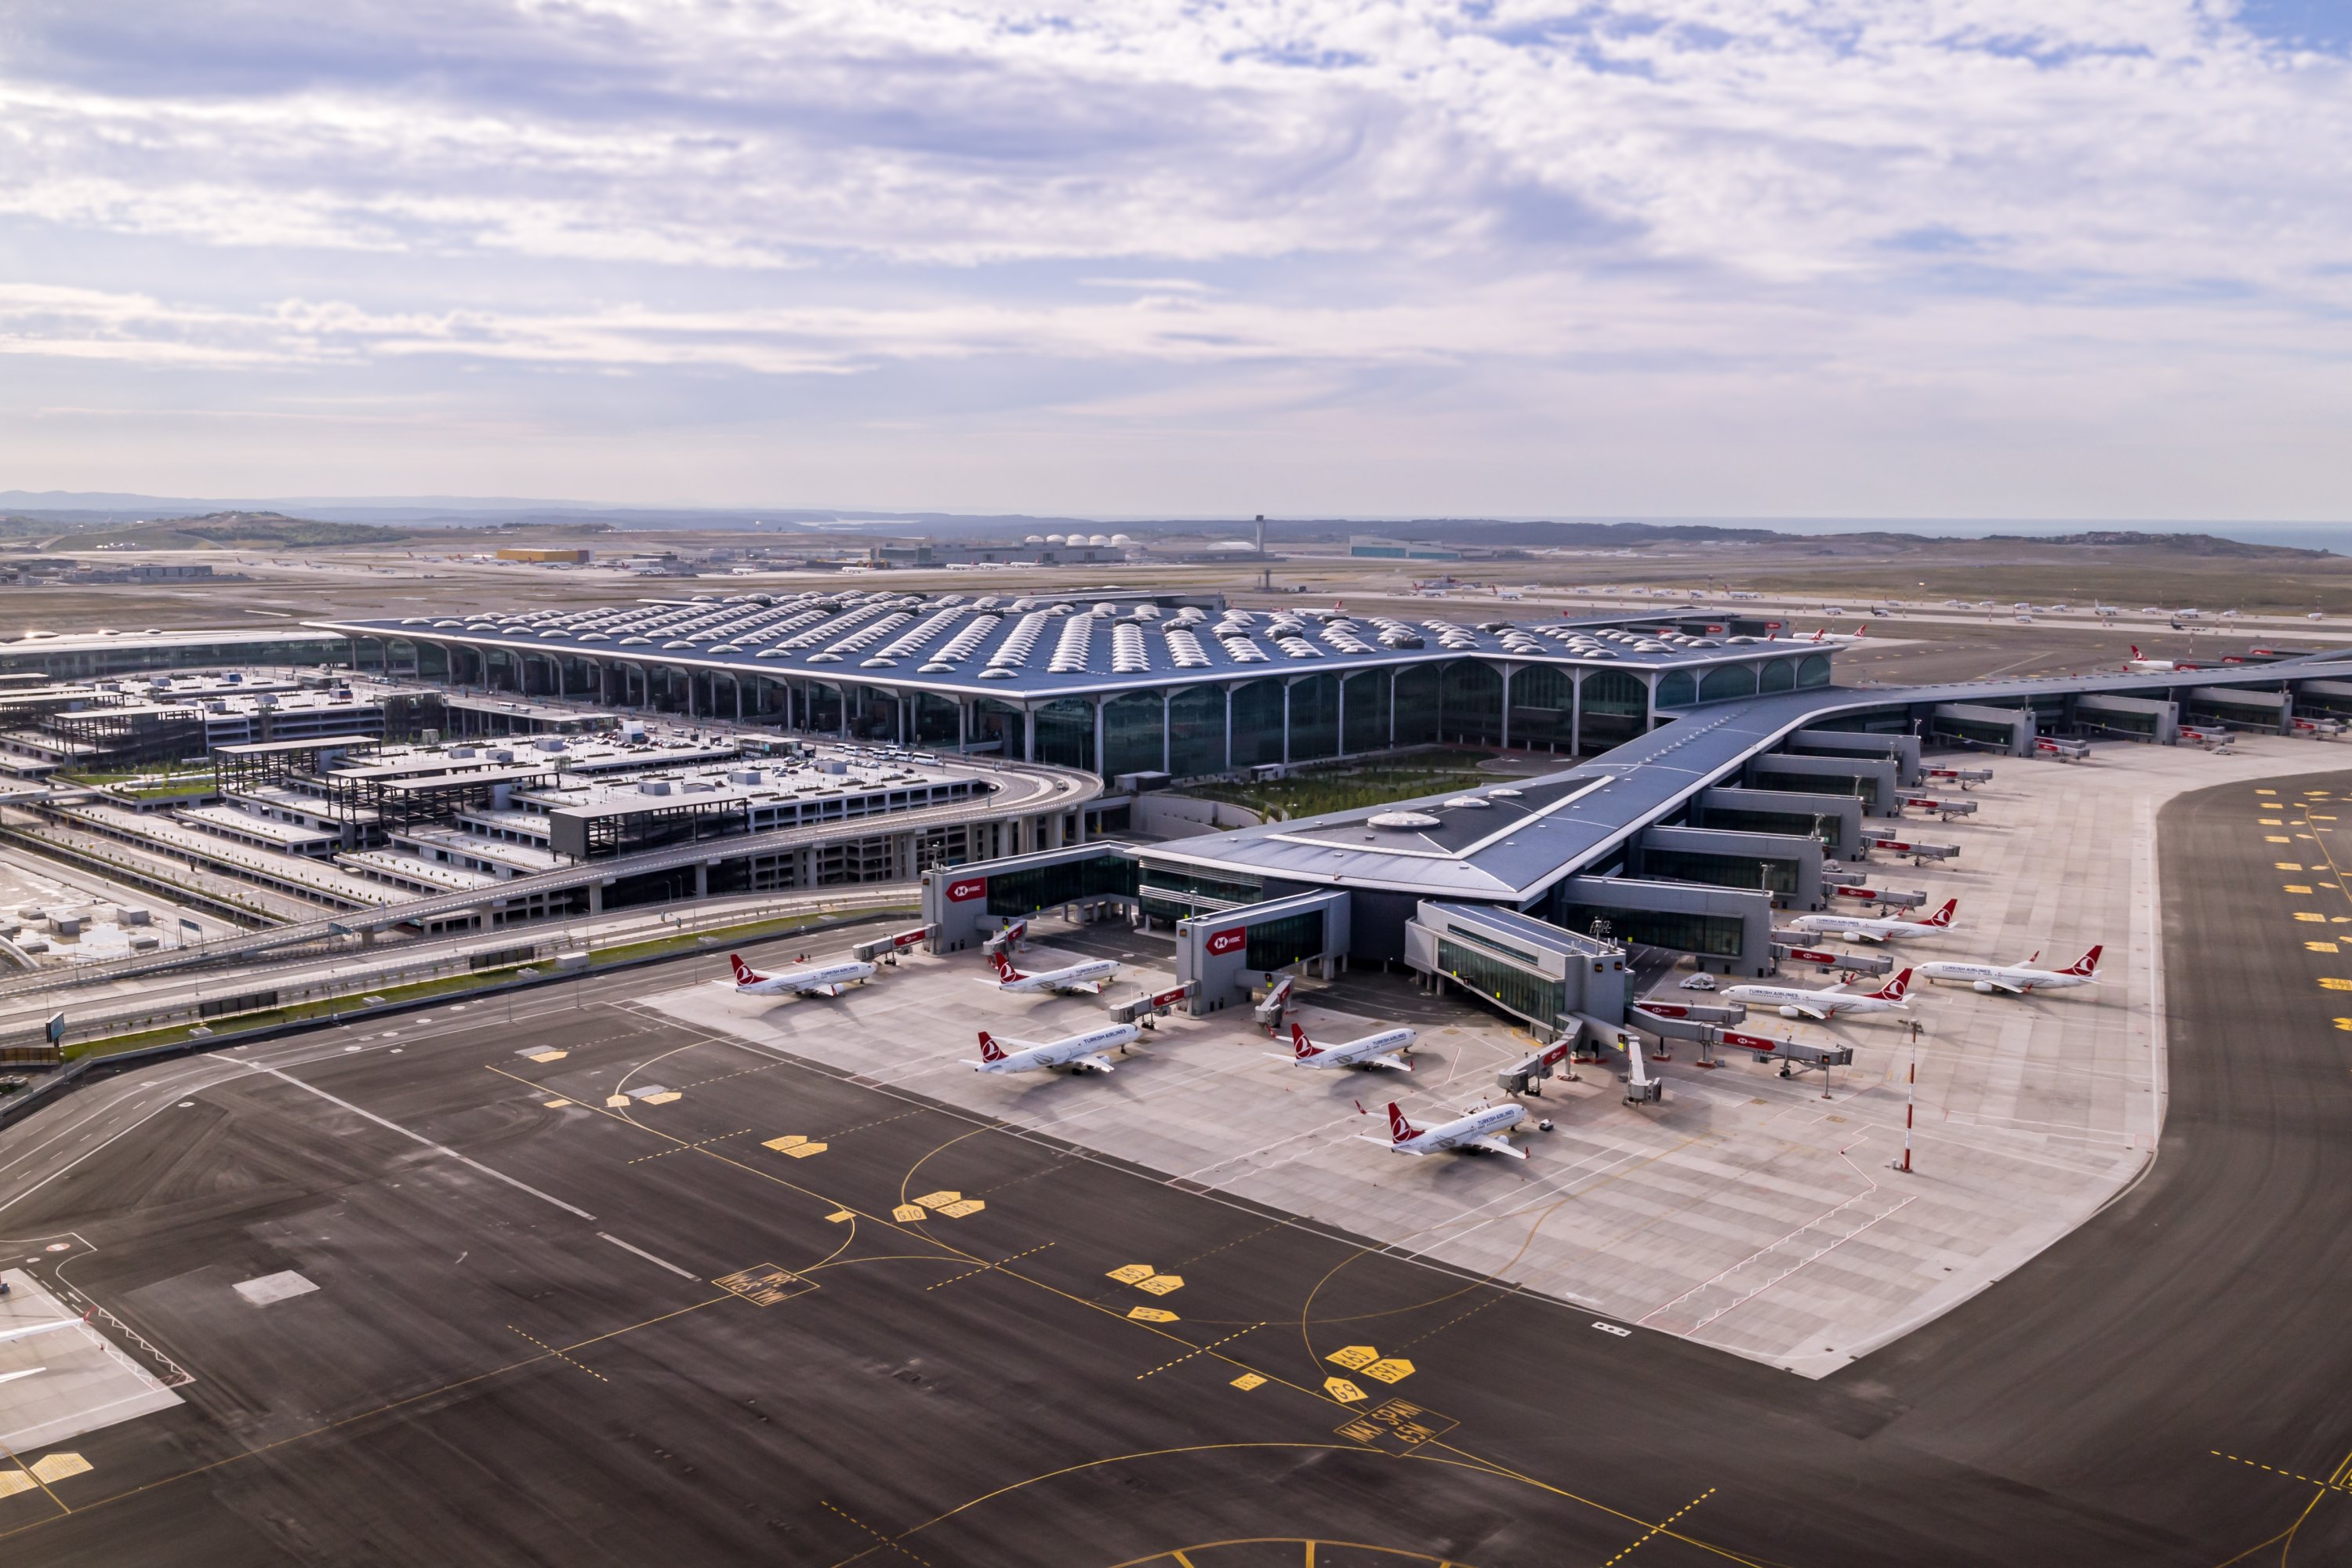 istanbul airport best in europe in digital transformation airports council international daily sabah